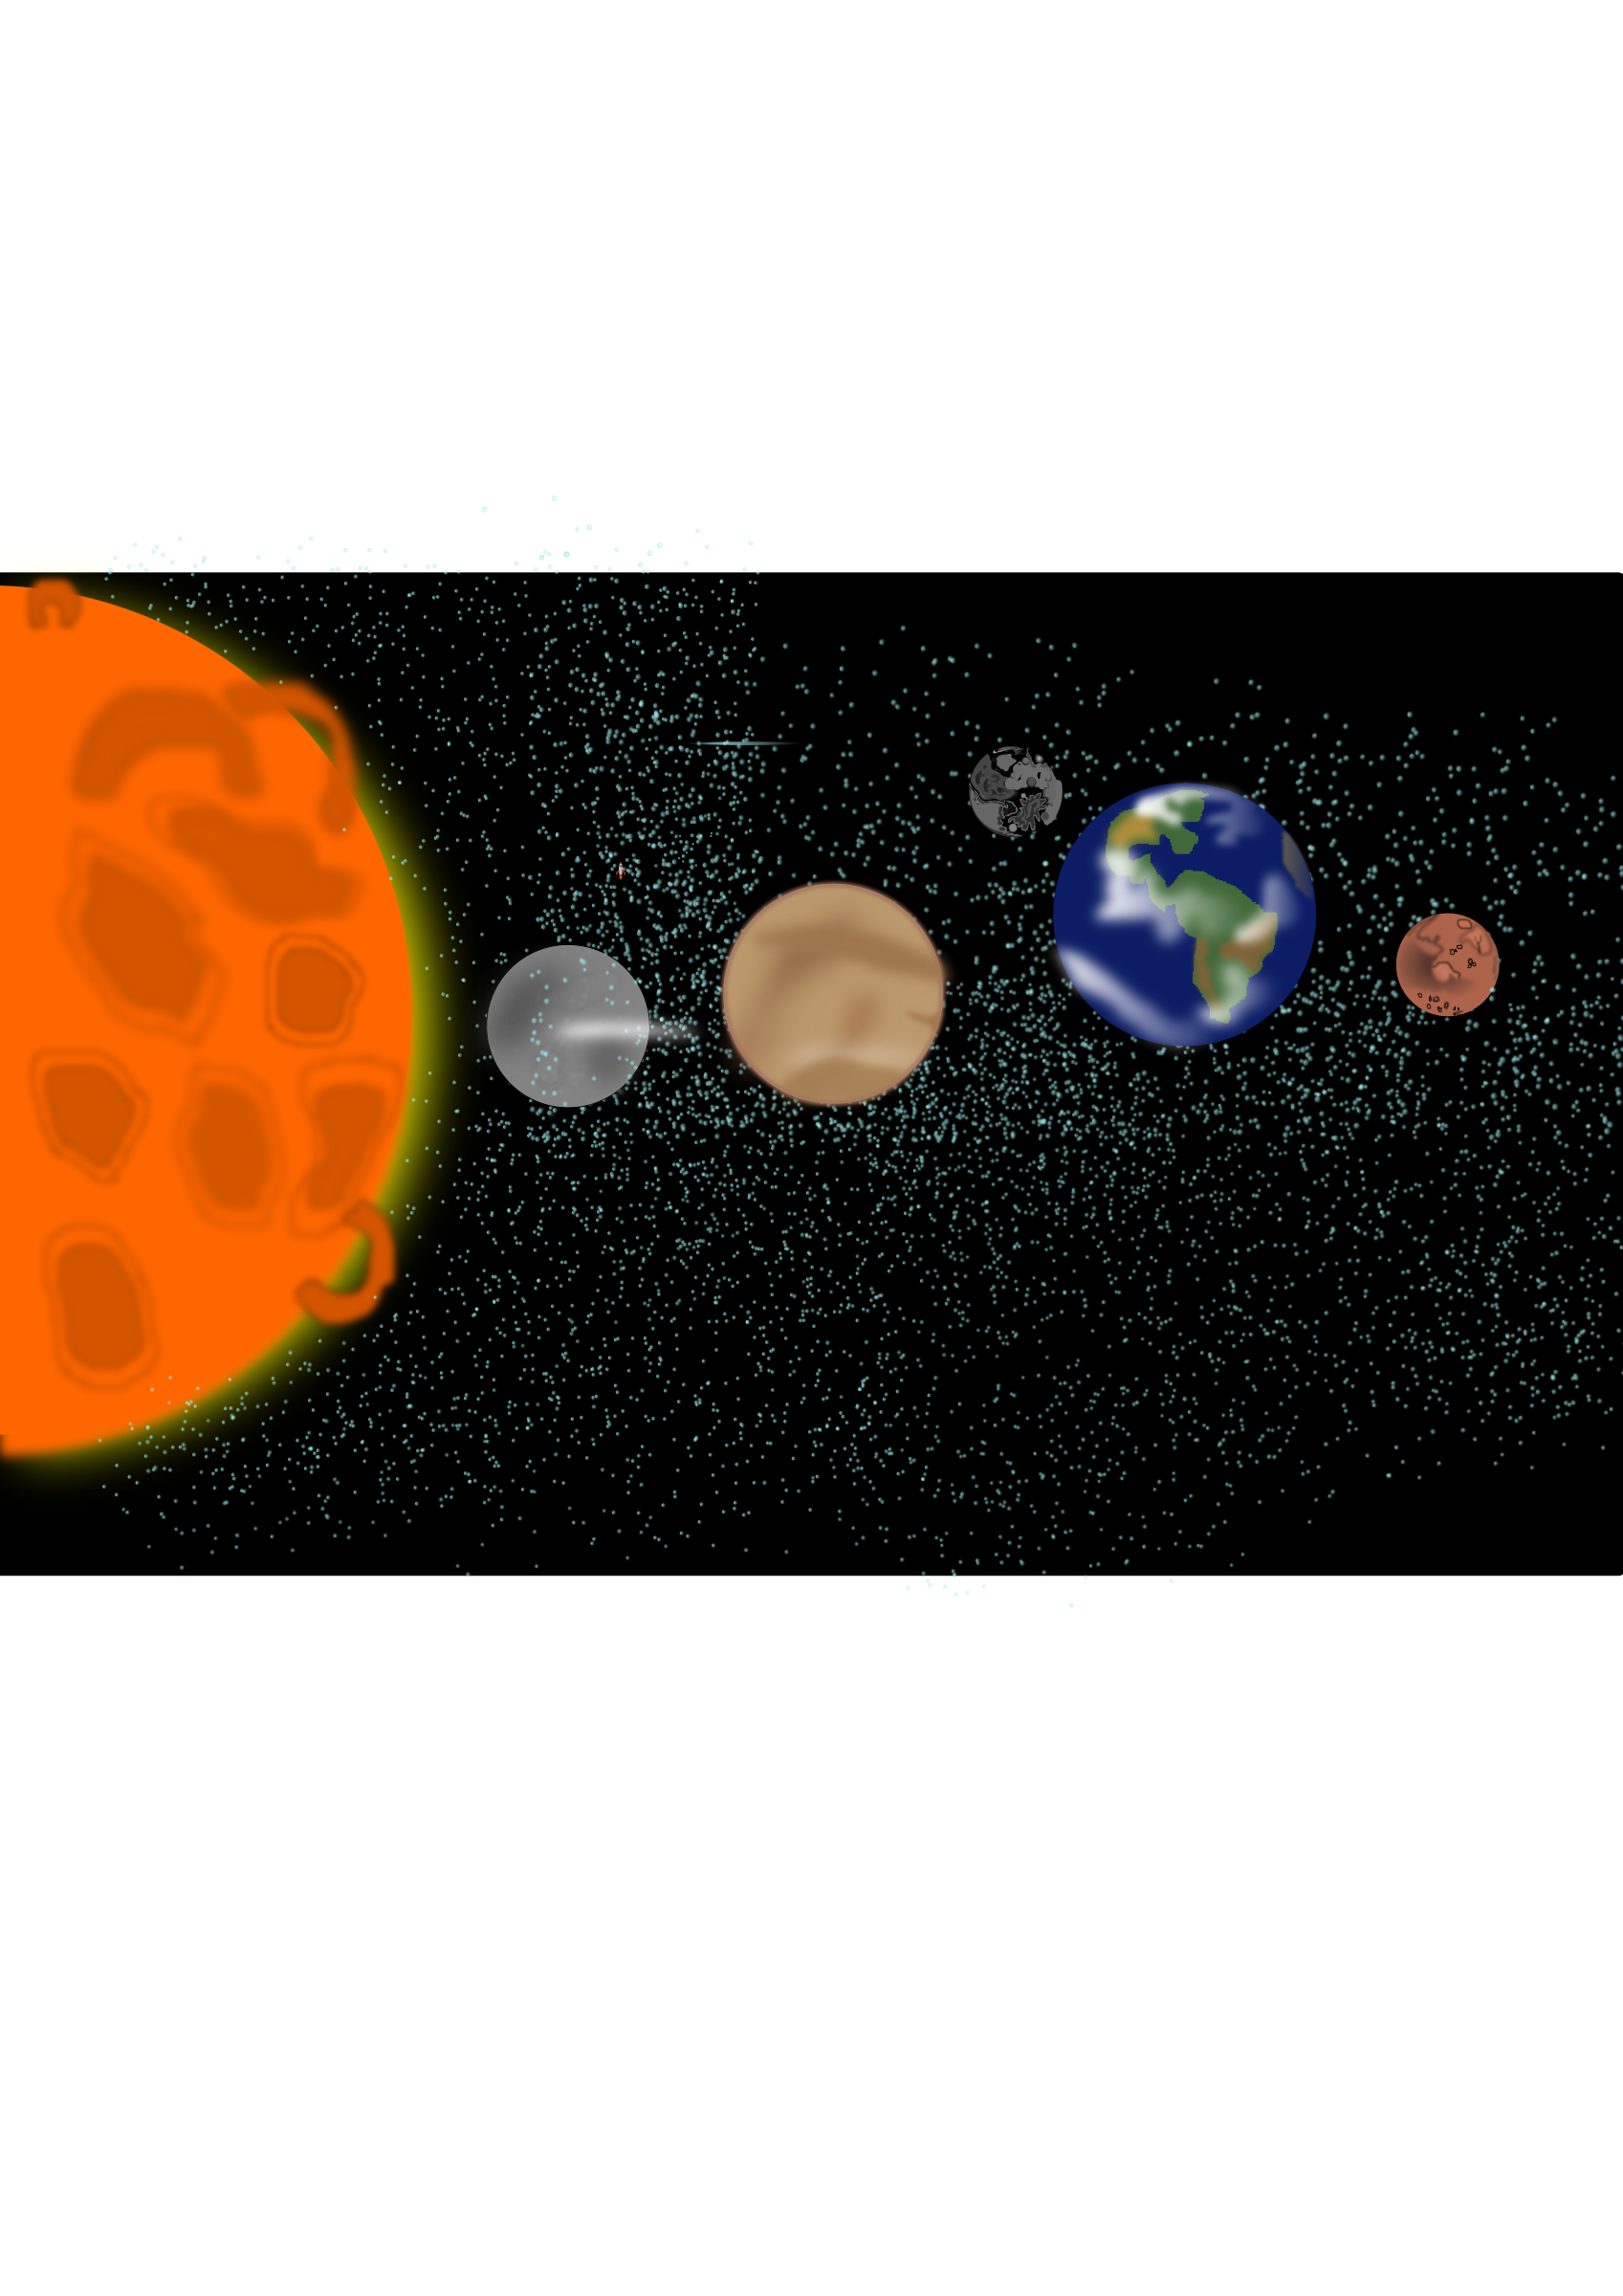 Big image png. Universe clipart science solar system